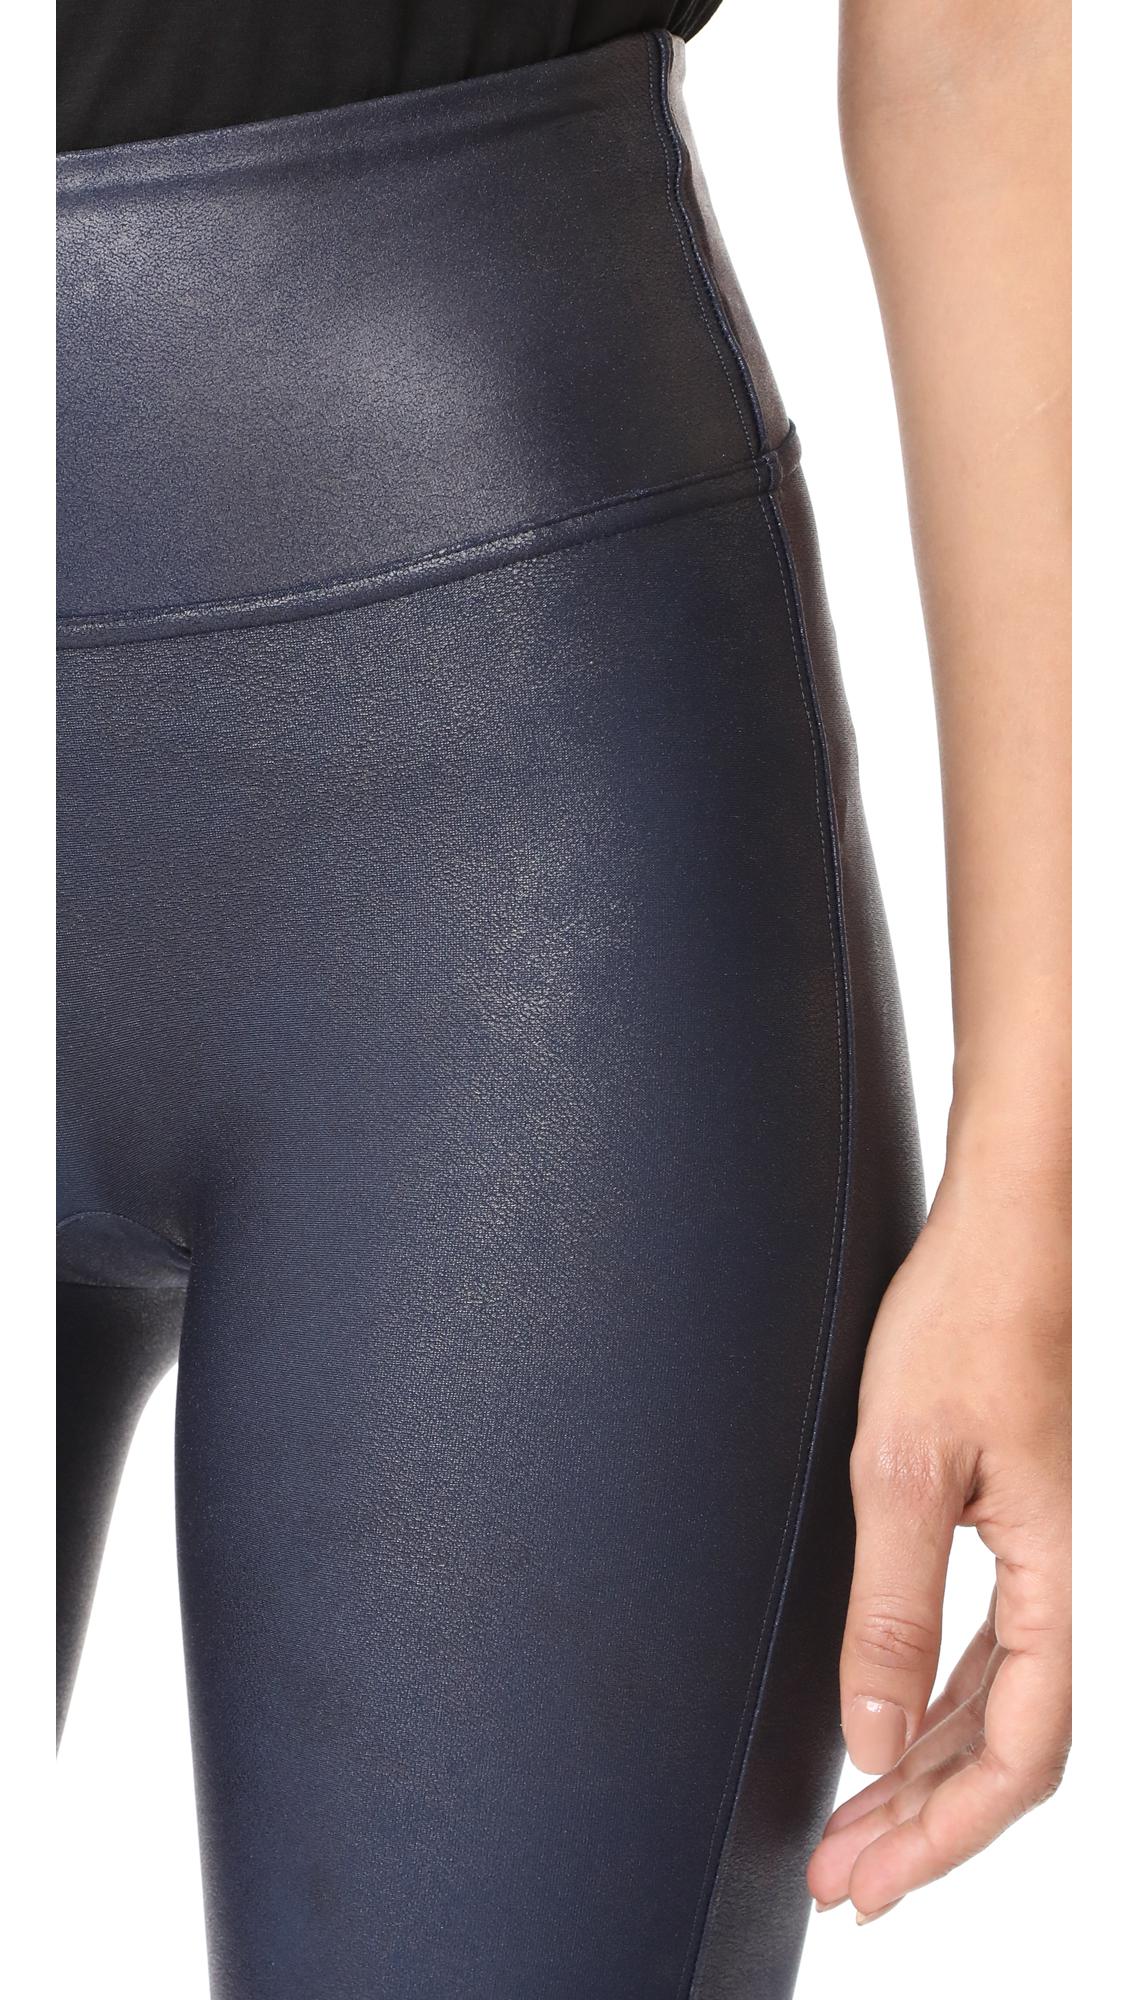 Spanx Faux Leather Leggings in Blue